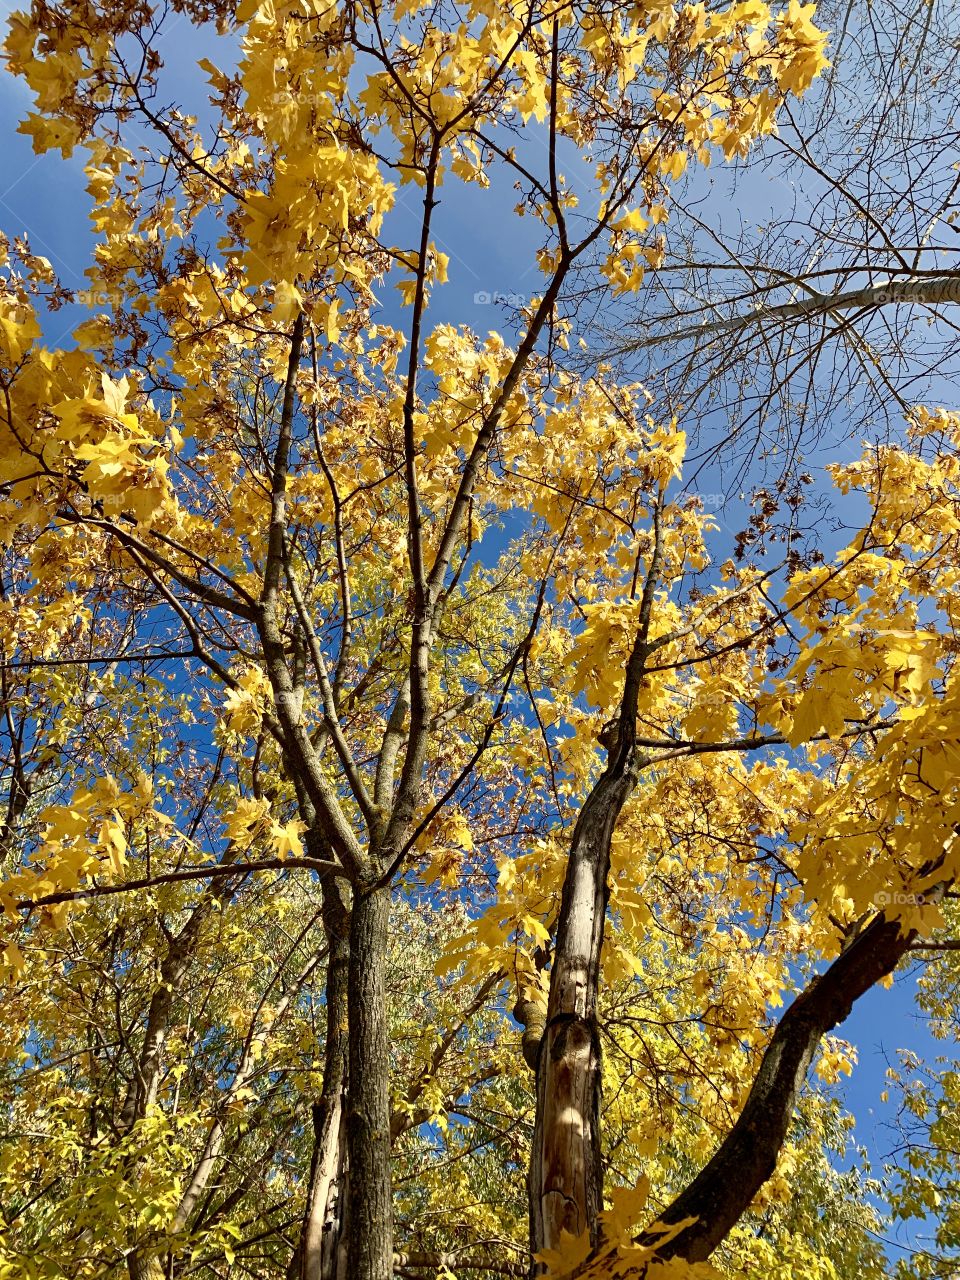 yellowed maple at the time of leaf fall. golden autumn foliage against a bright blue sky